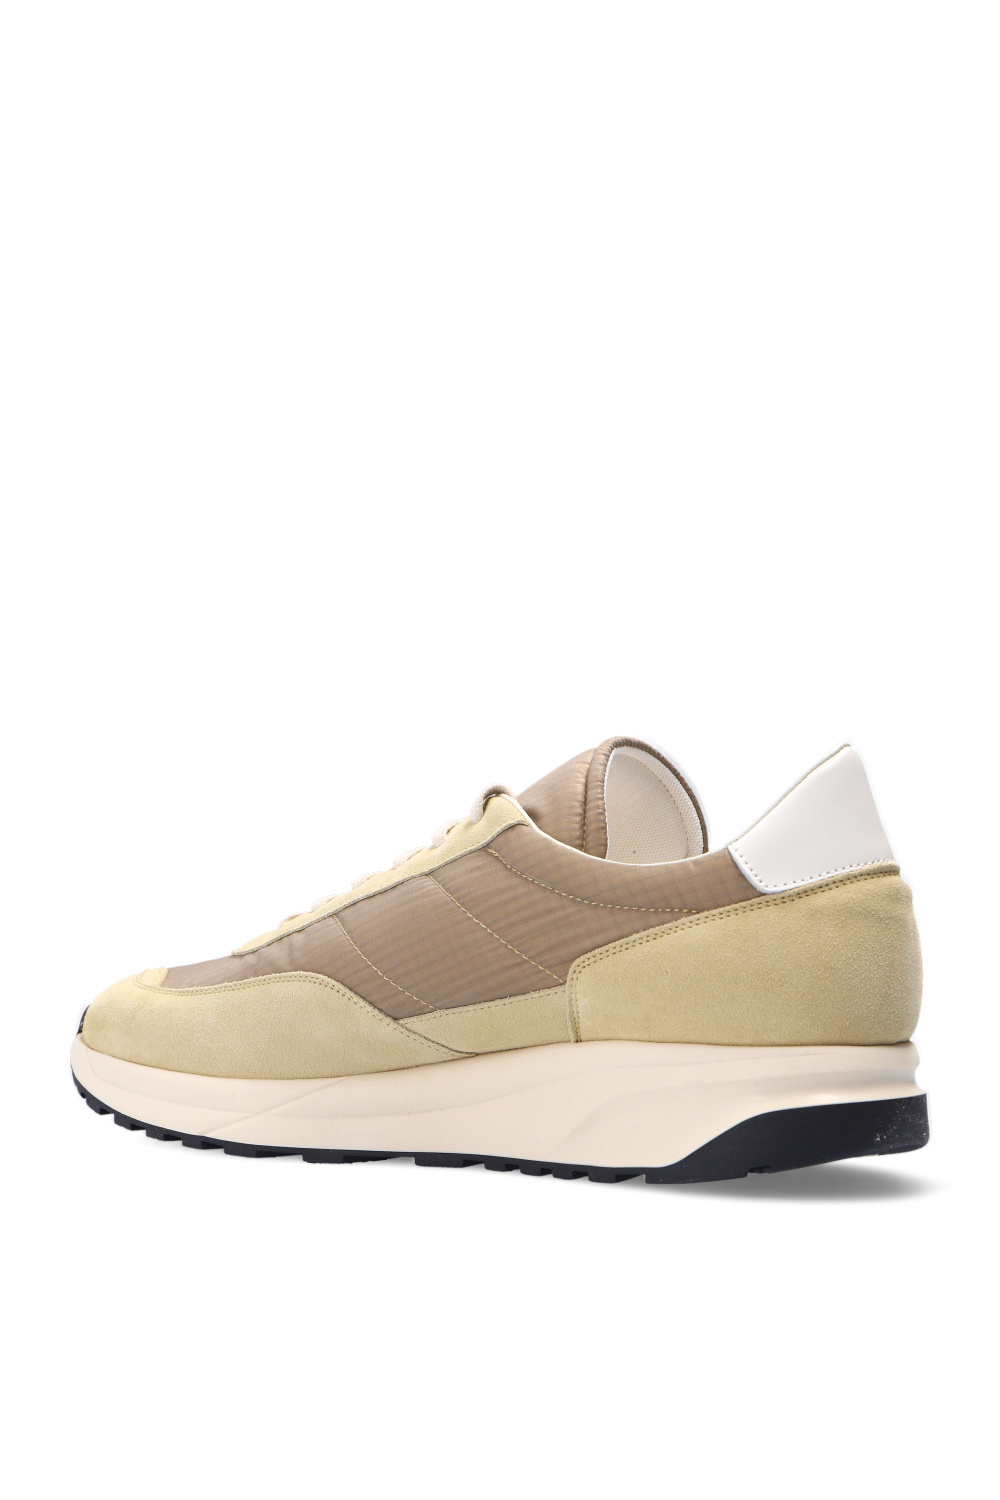 Common Projects ‘Track Classic’ sneakers